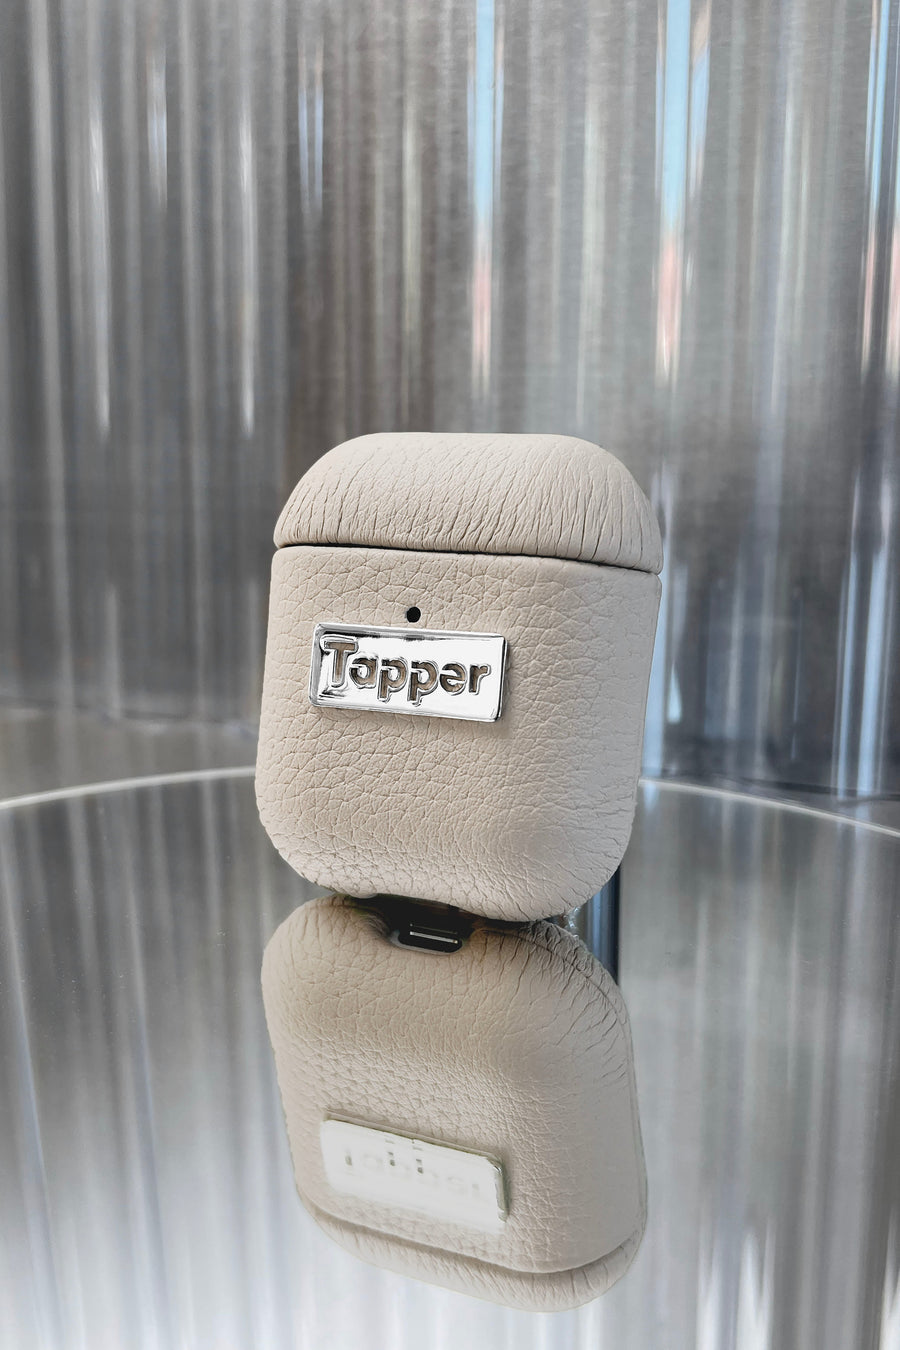 Tapper's luxurious sand beige genuine cow leather AirPods case protects and elevates the look of your AirPods. The luxurious, protective case for AirPods with a metal logo plate colored in silver steps up your AirPods game. The next must-have high end protective Apple AirPods accessory in real leather and metal details. Compatible with AirPods (1st and 2nd generation). Designed in Sweden by Tapper. Free Express Shipping at gettapper.com